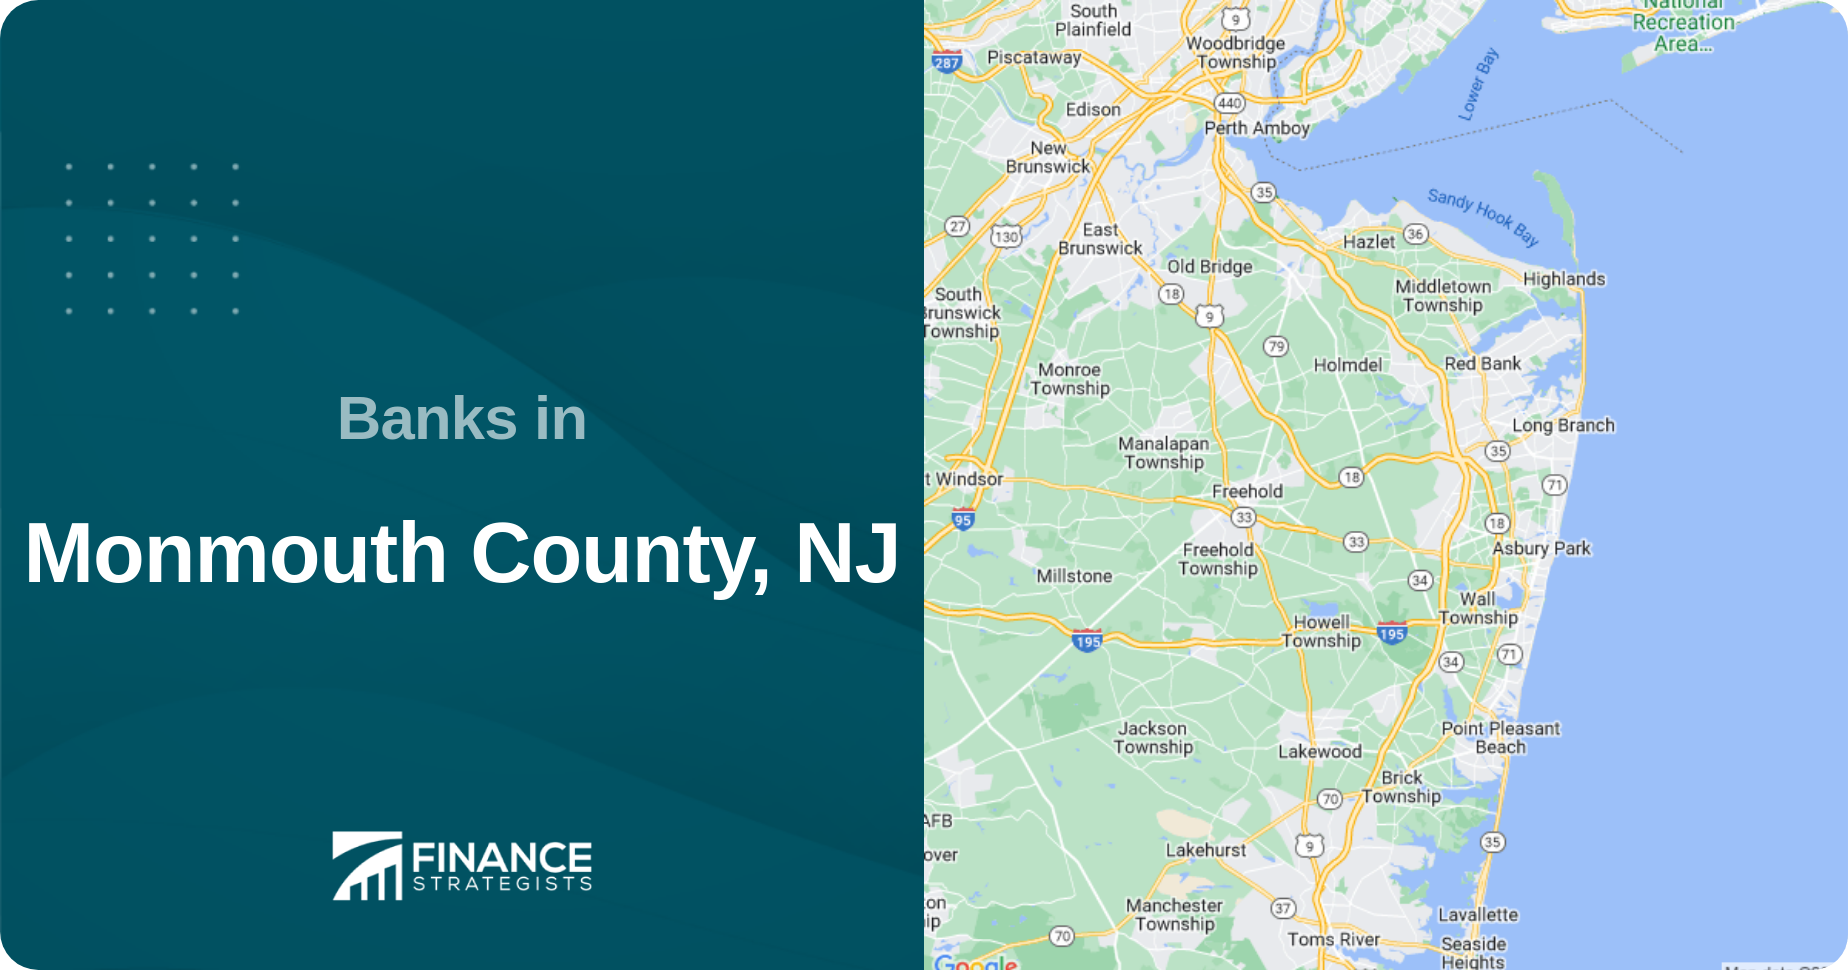 Banks in Monmouth County, NJ